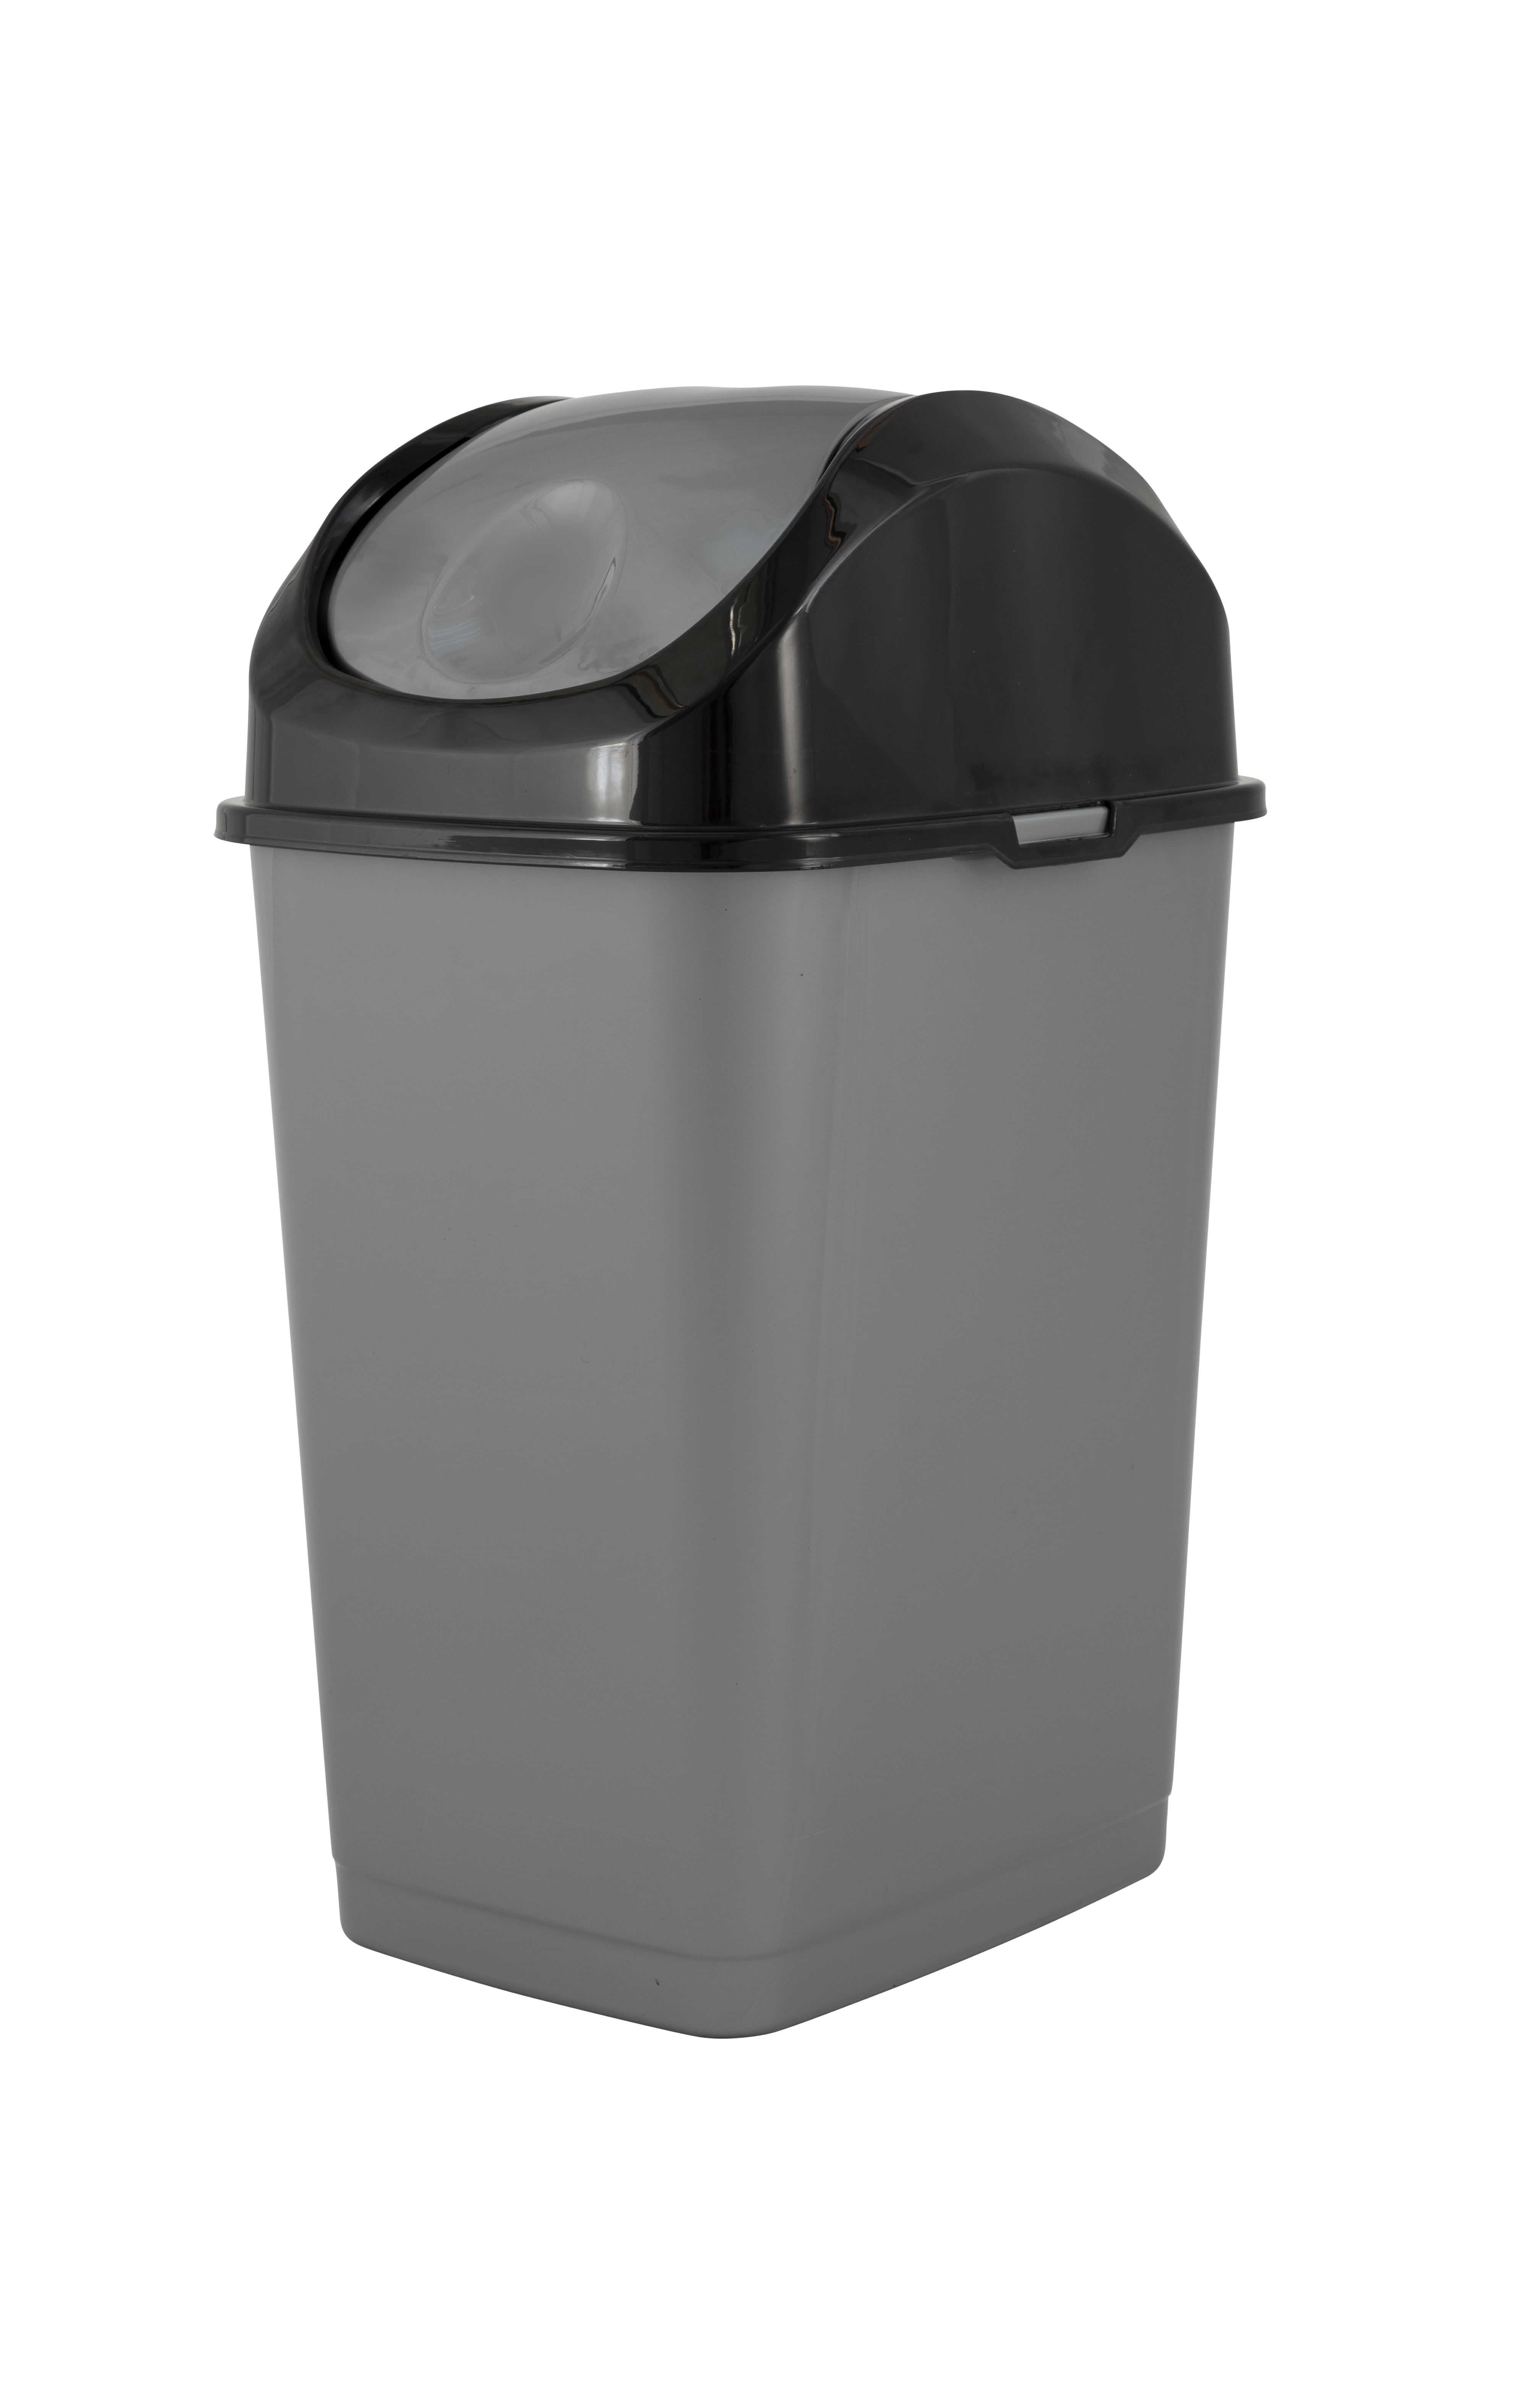 Stylish Gray Plastic 2.4 Gallon Trash Can Waste Bin with Swing Top Removable Lid 